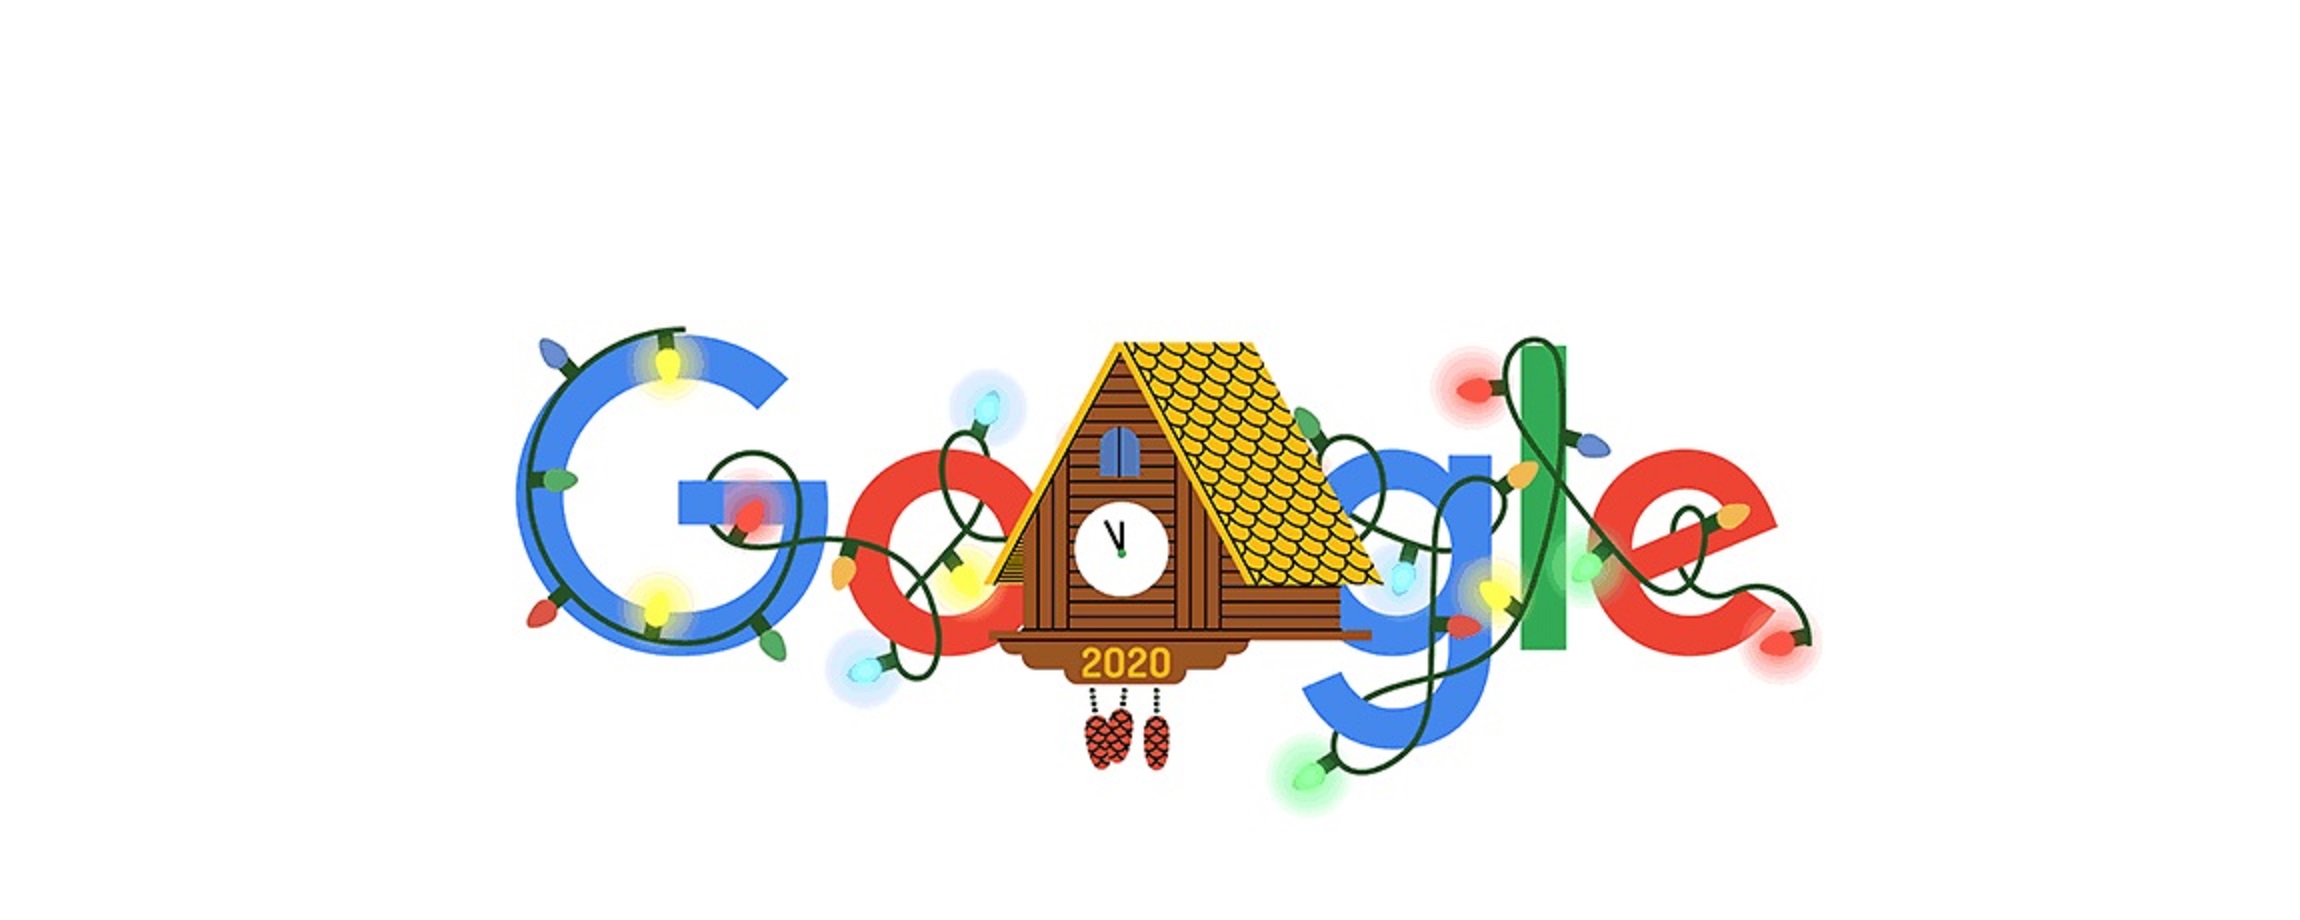 New Year's Eve Google Doodle Counts Down to End of 'Cuckoo ...